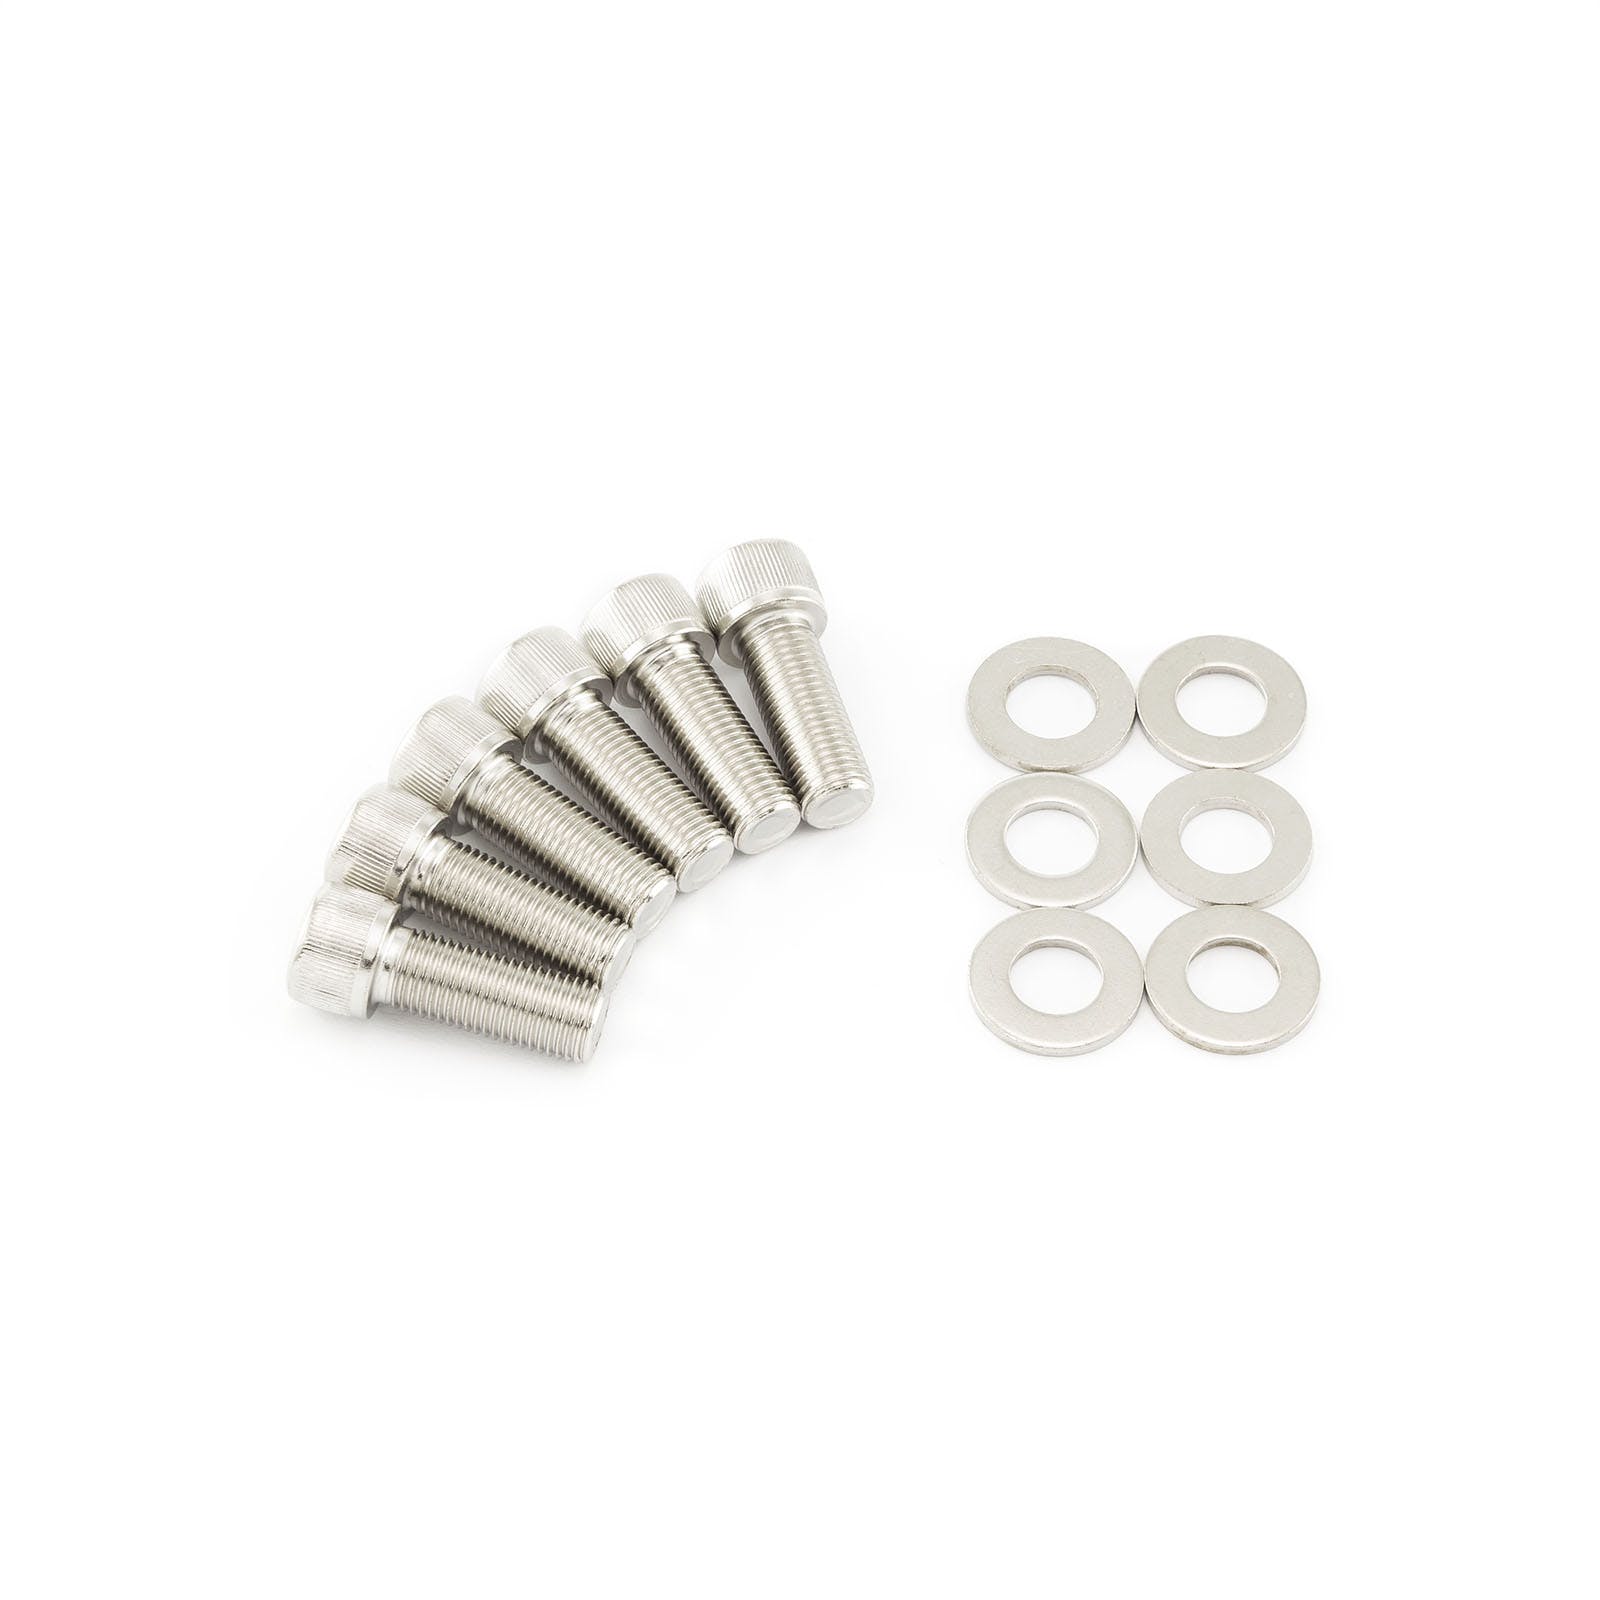 Speedmaster PCE153.1004 Supercharger Snout Pulley Bolt Kit 1.25 3/8 Fine Thread (Qty.6)